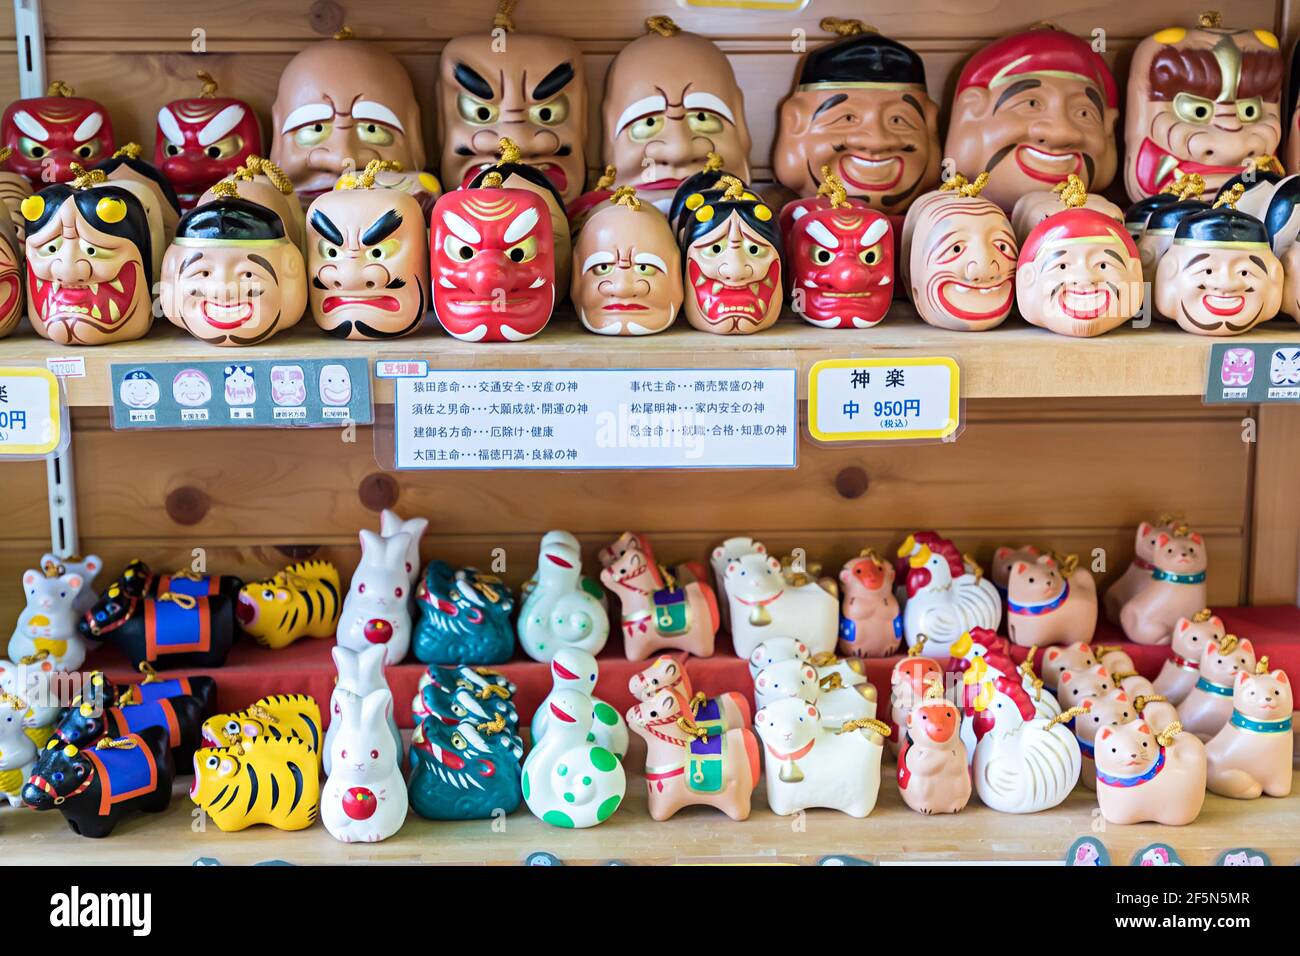 Toy faces on sale in shop, Japan Stock Photo